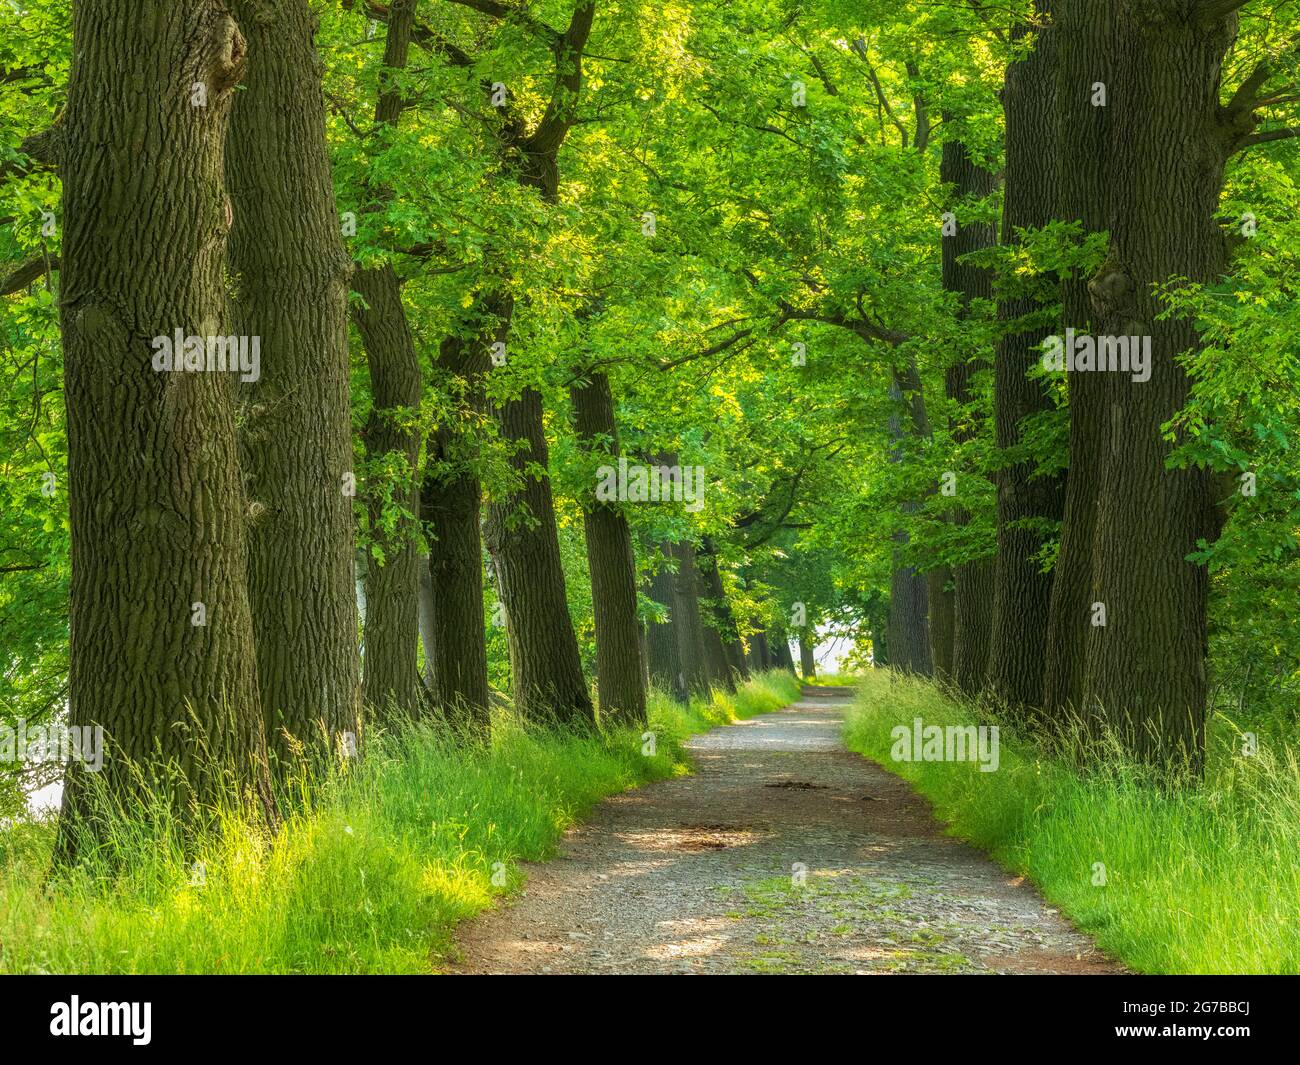 Oak avenue in the Plothen pond area, Thuringian Slate Mountains Upper Saale nature park Park, Saale-Orla district, Thuringia, Germany Stock Photo